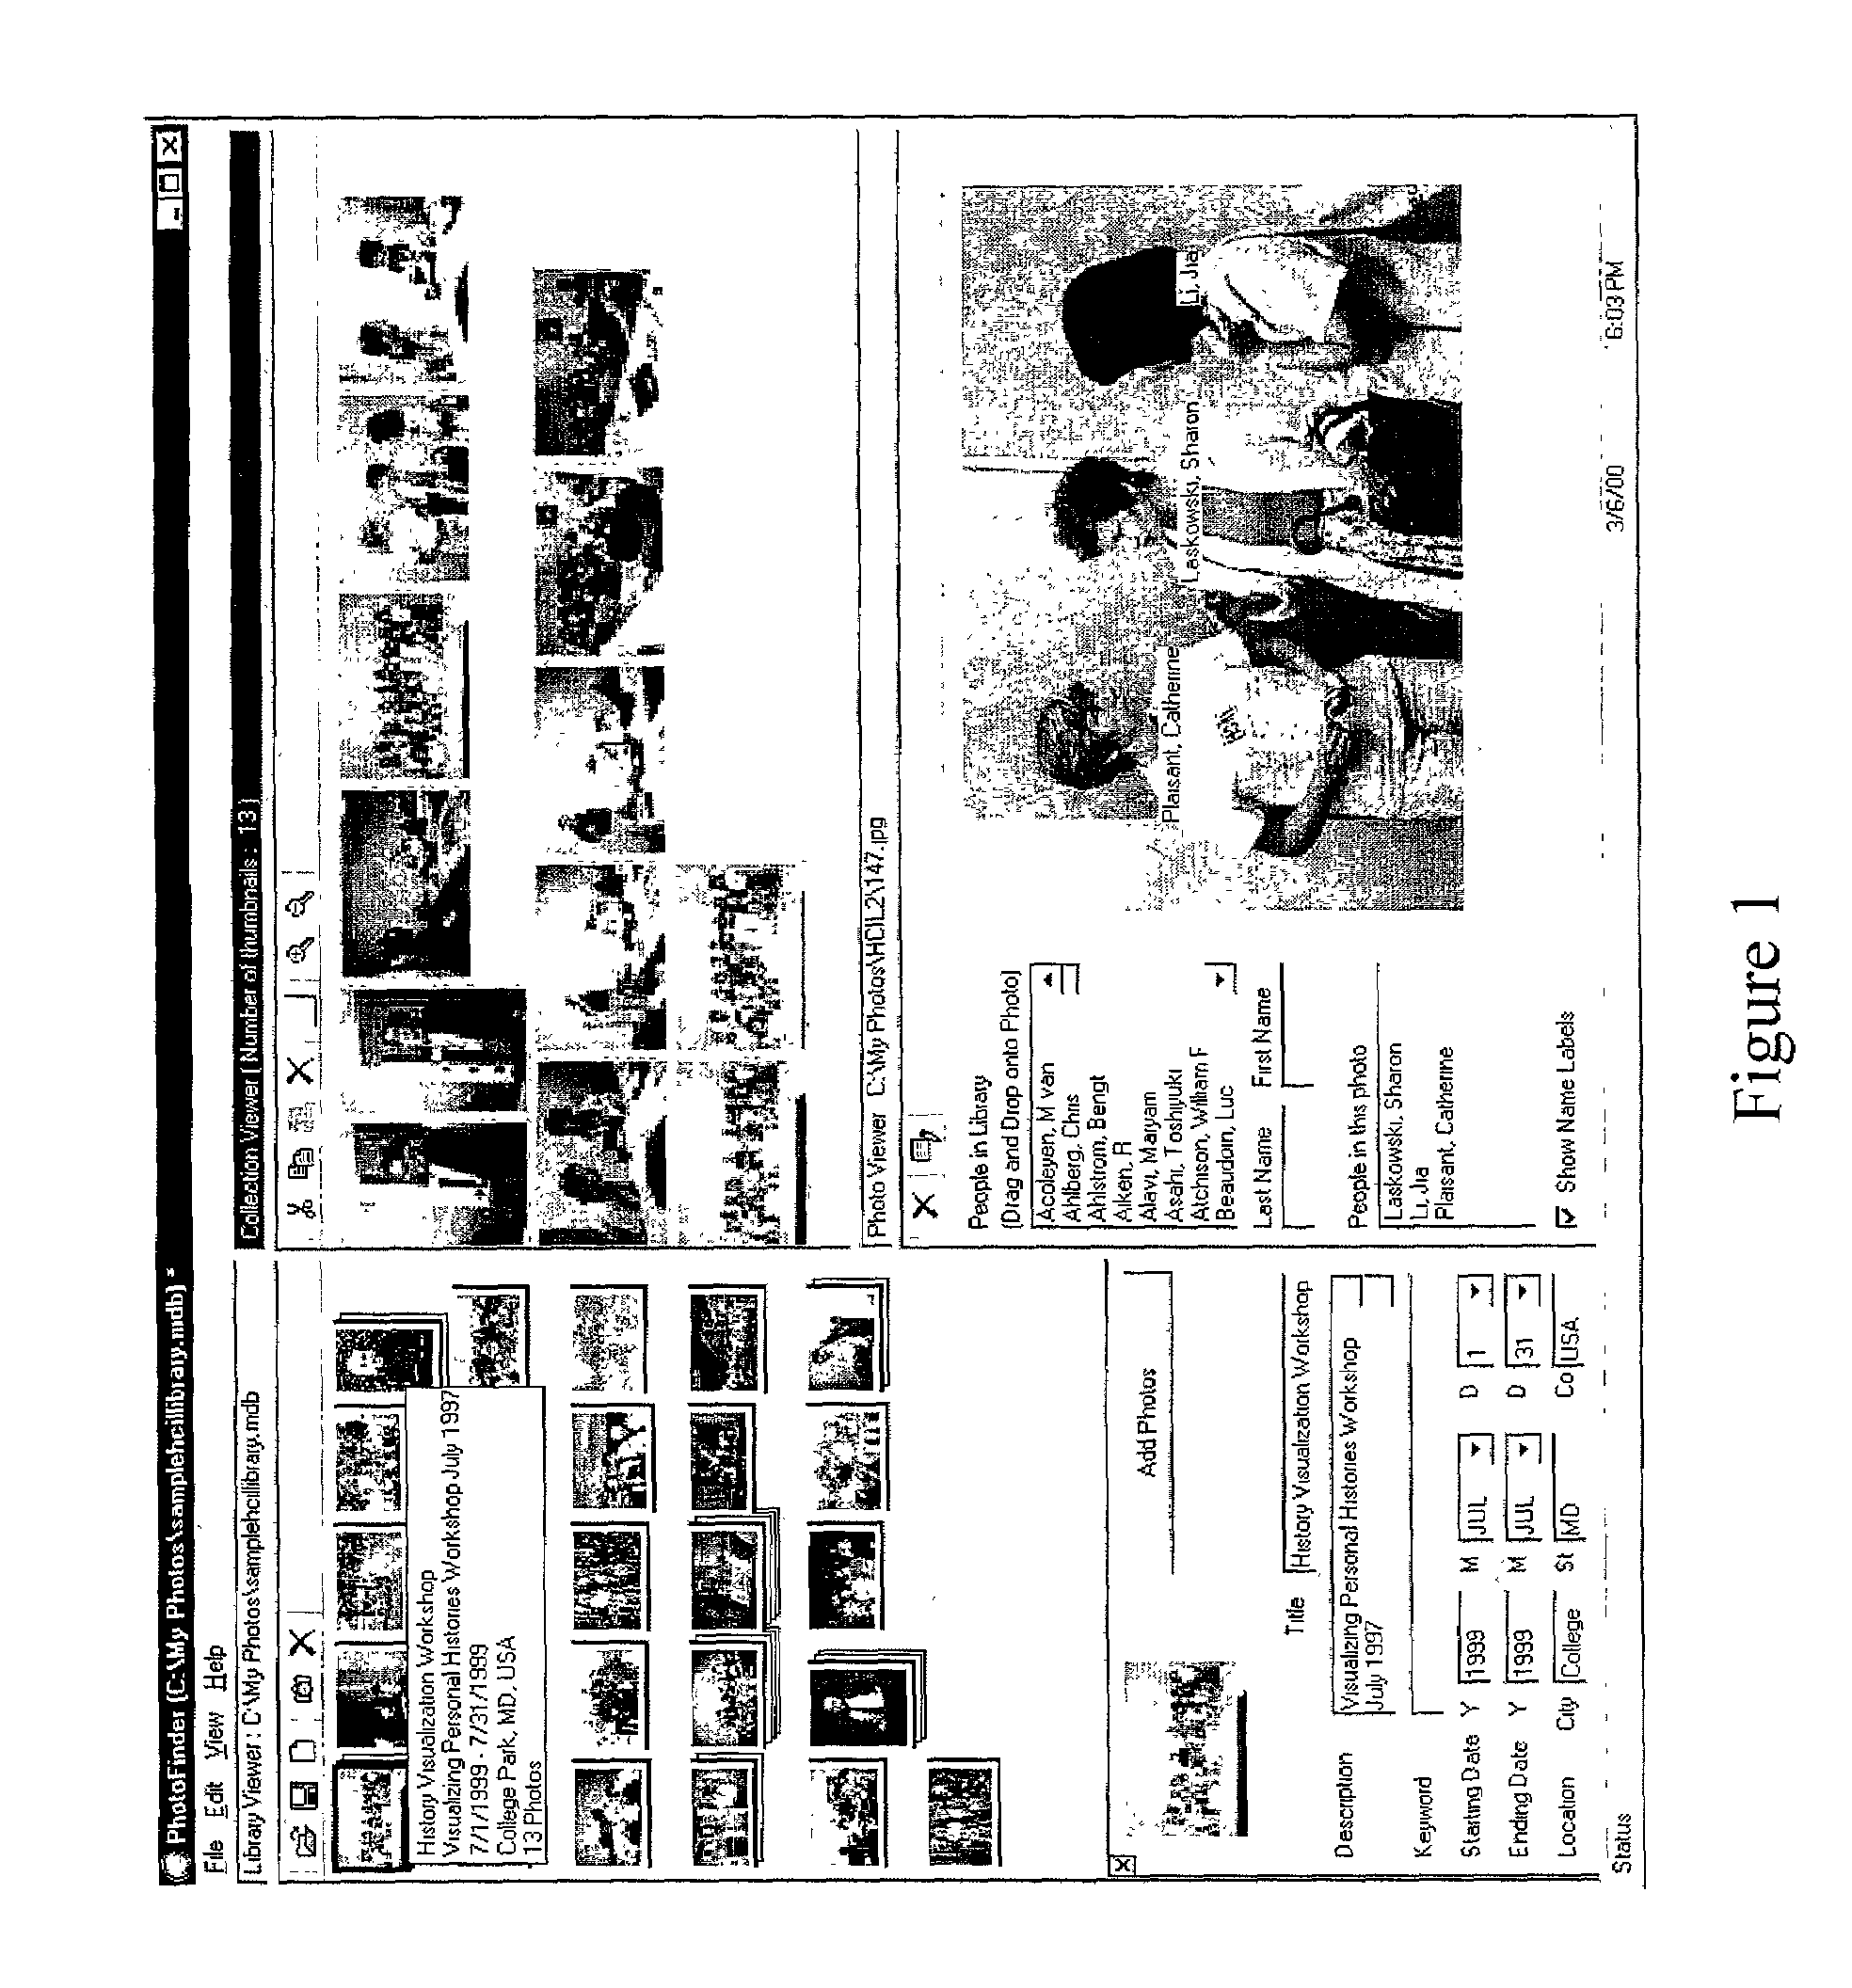 Methods for the electronic annotation, retrieval, and use of electronic images